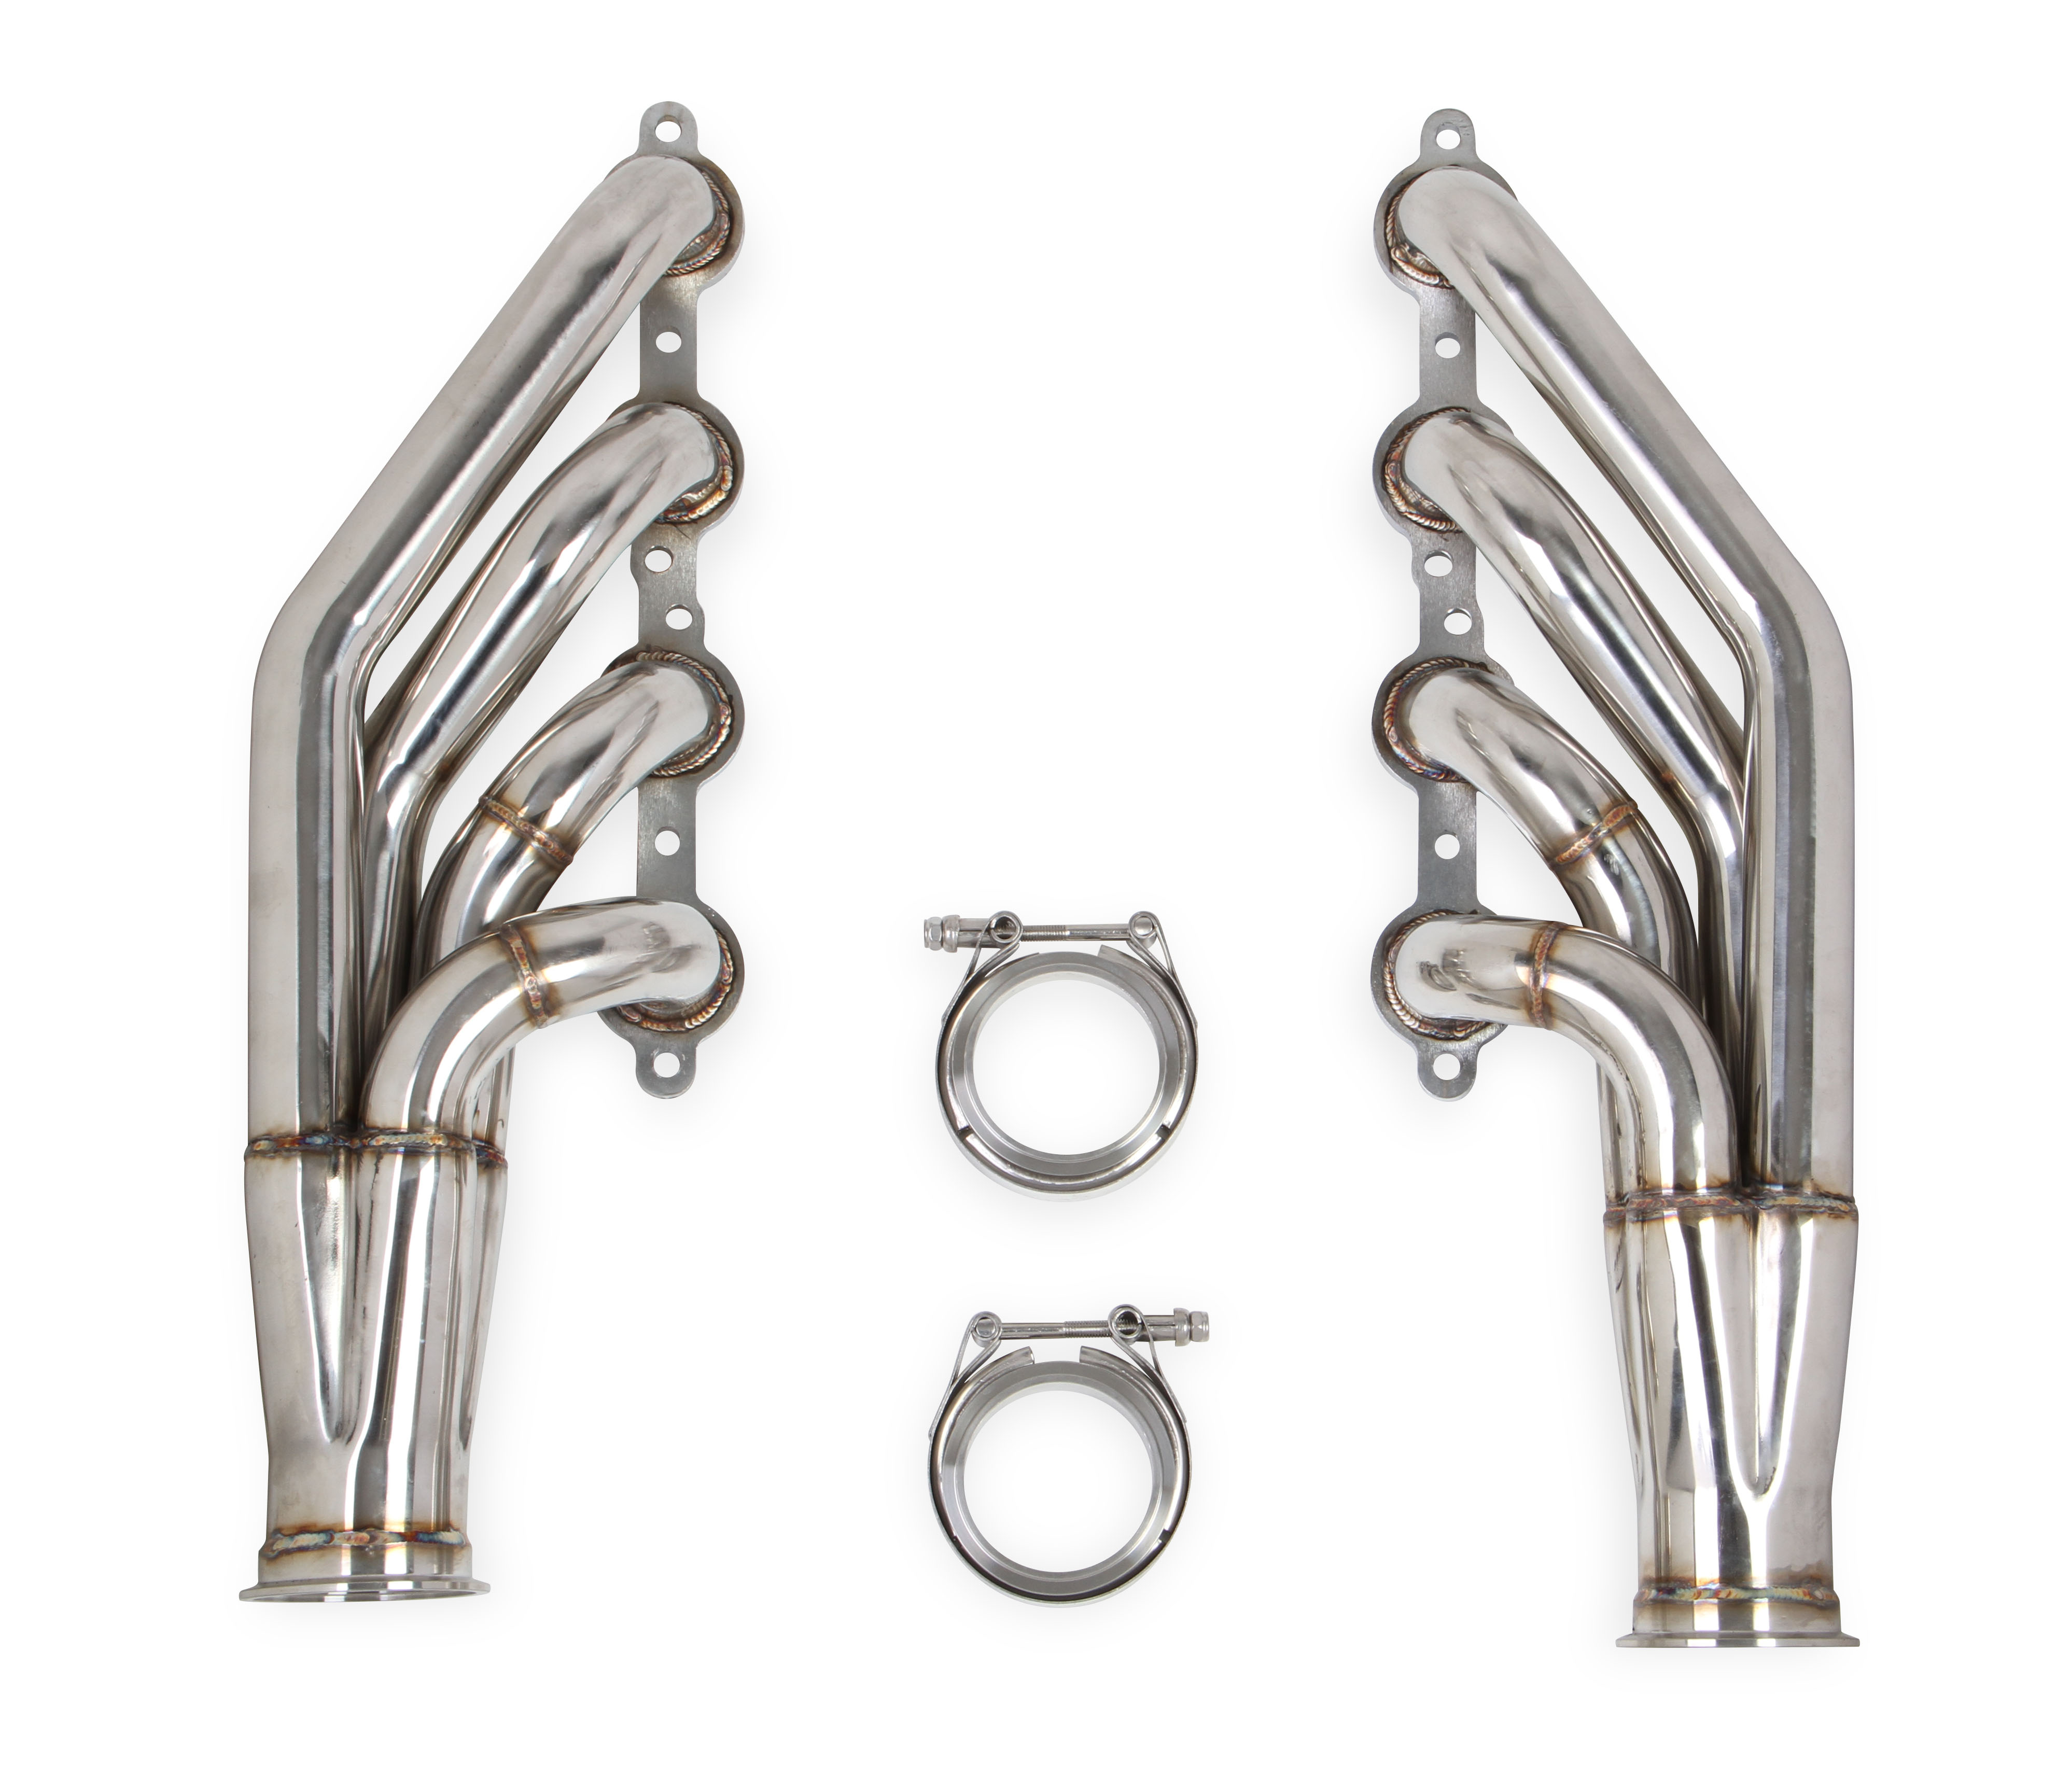 Flowtech LS 4.8L/5.3L/6.0L V8 1 7/8" 409 Stainless Turbo Headers - Painted Black